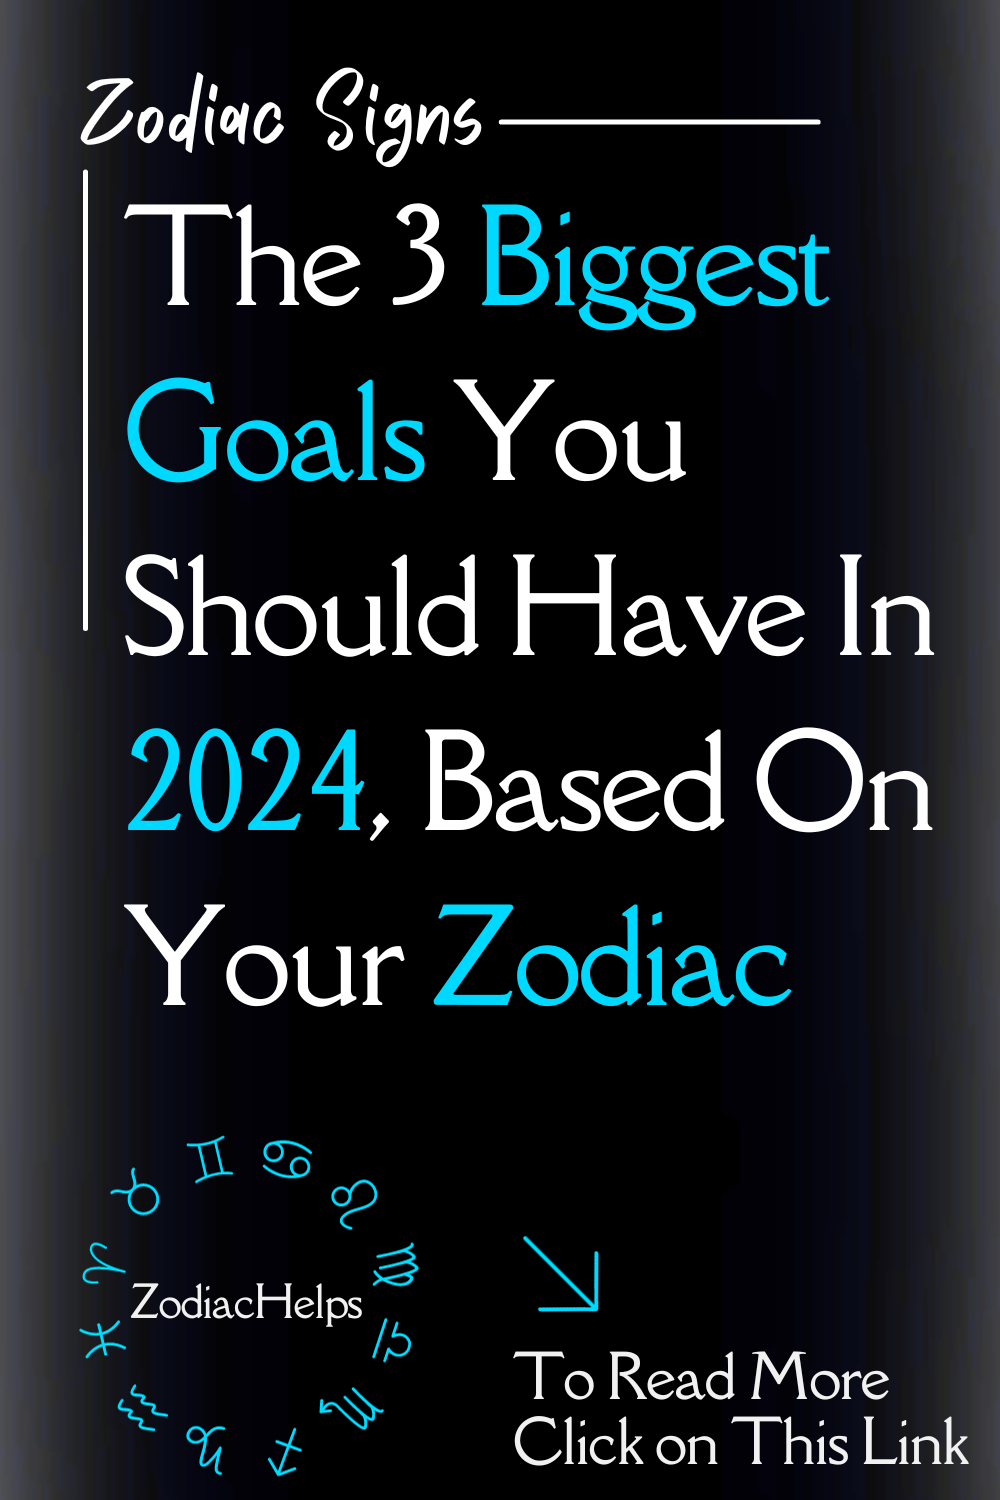 The 3 Biggest Goals You Should Have In 2024, Based On Your Zodiac